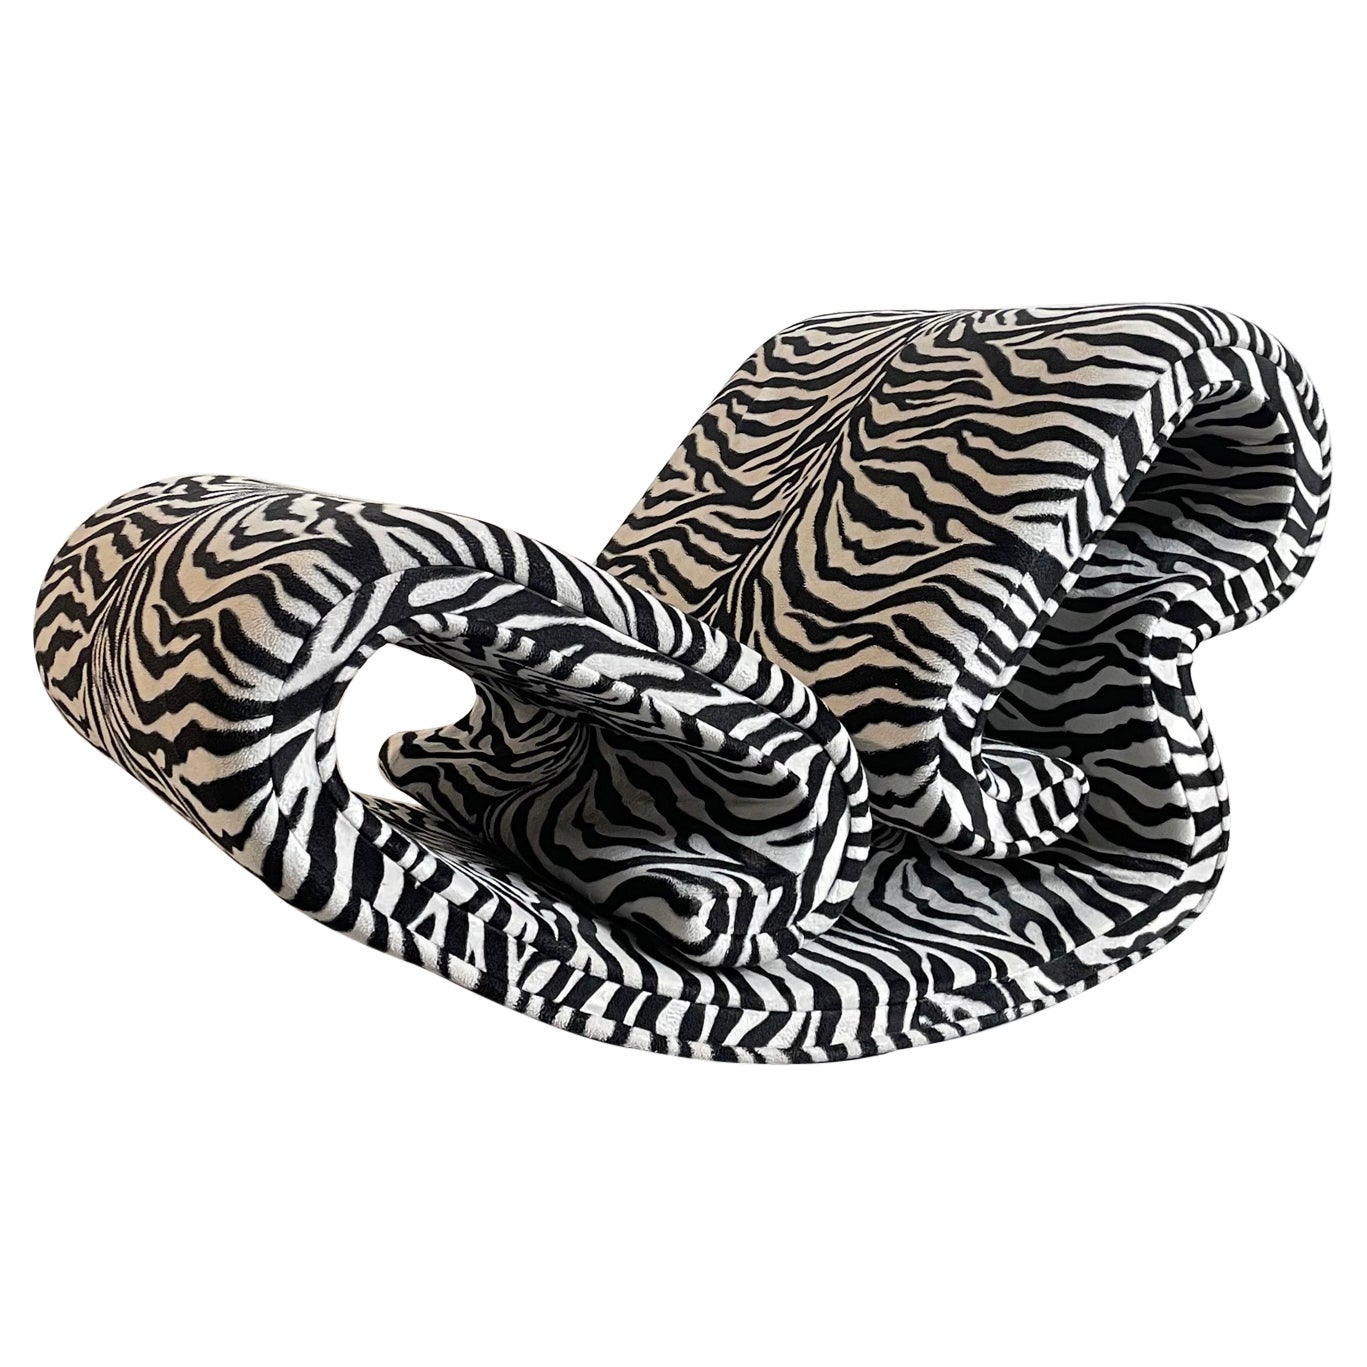 Vintage Sculptural Organic Shape Lounge Chair in Zebra Fabric, C1970s